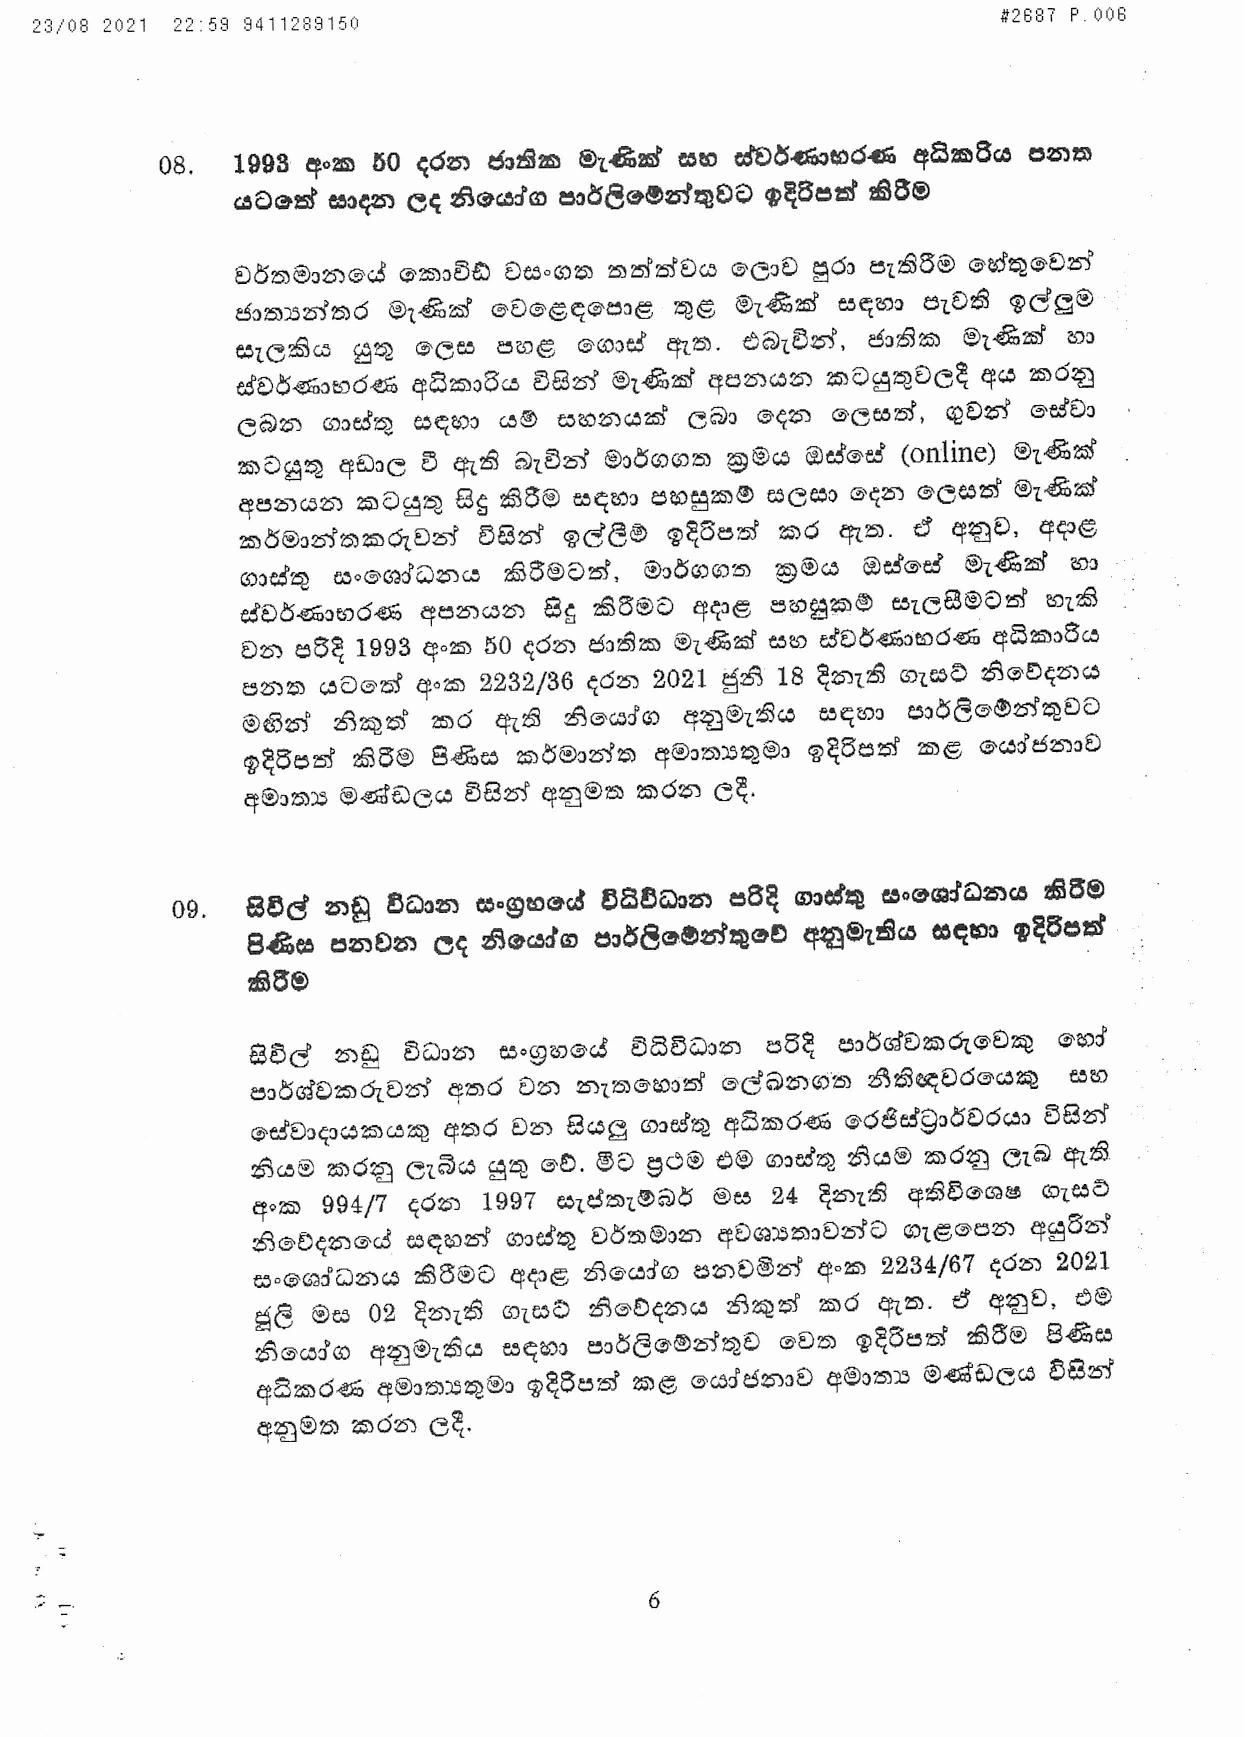 Cabinet Decision on 23.08.2021 page 006